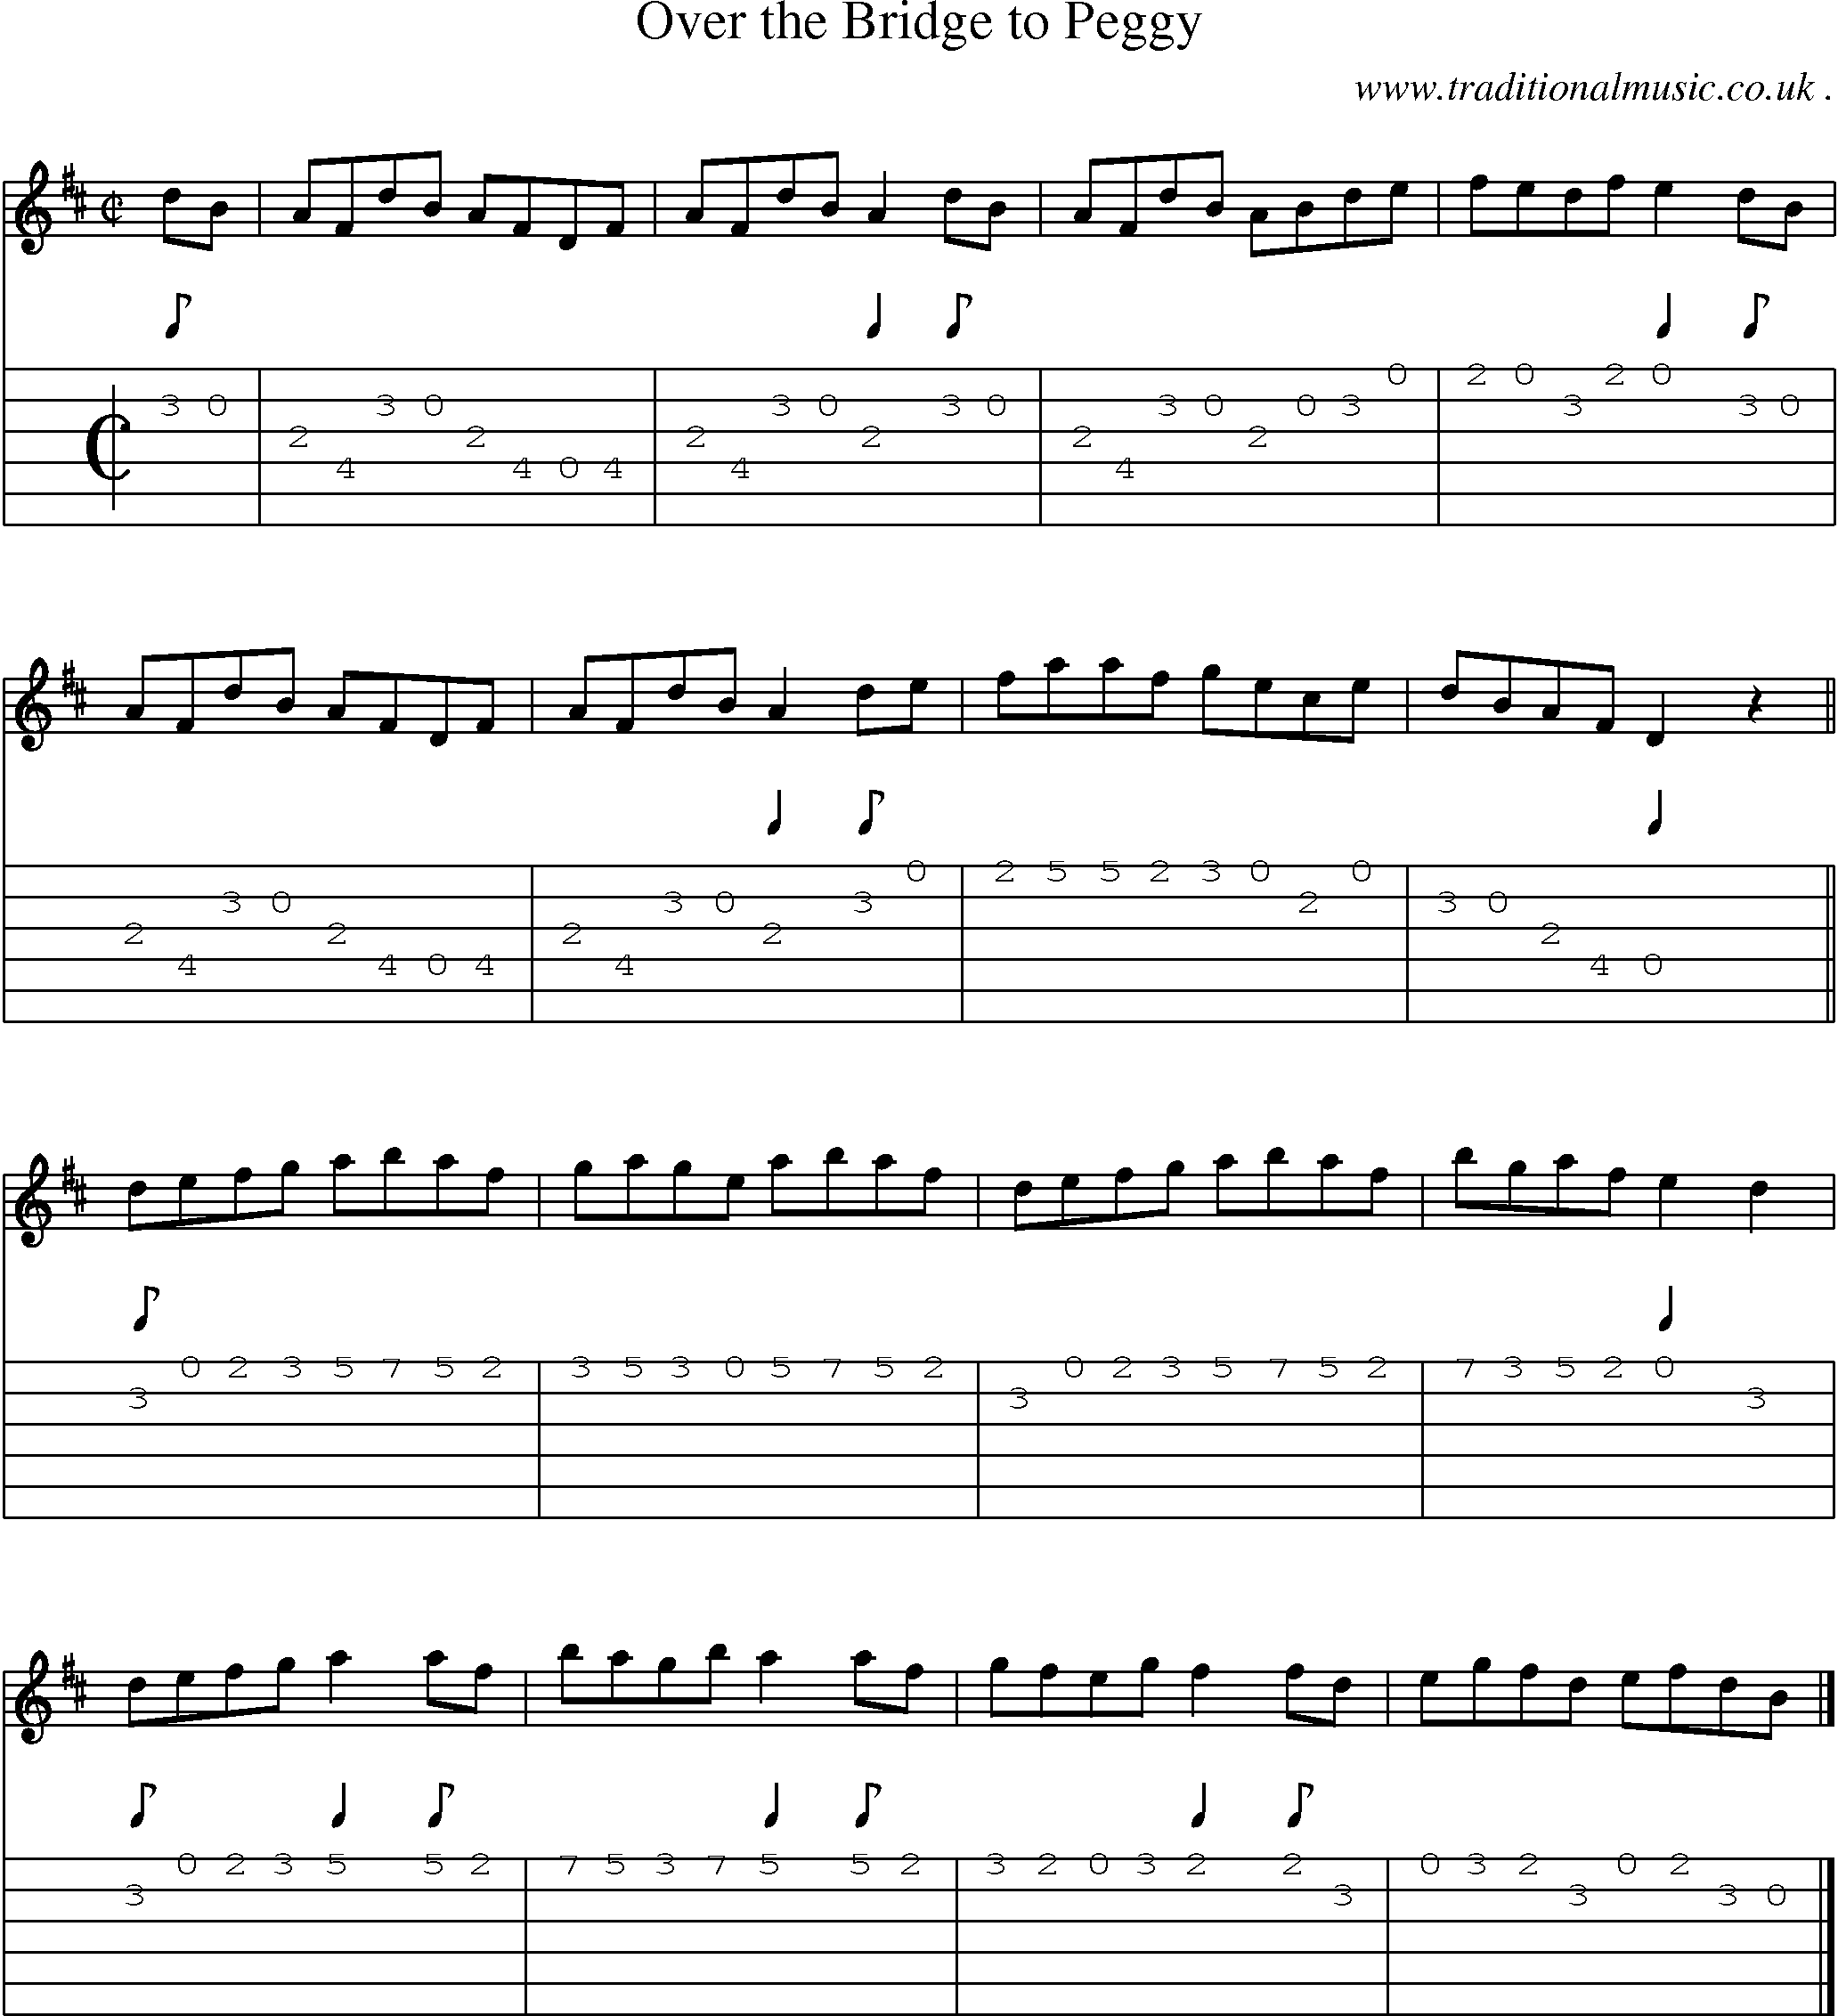 Sheet-music  score, Chords and Guitar Tabs for Over The Bridge To Peggy